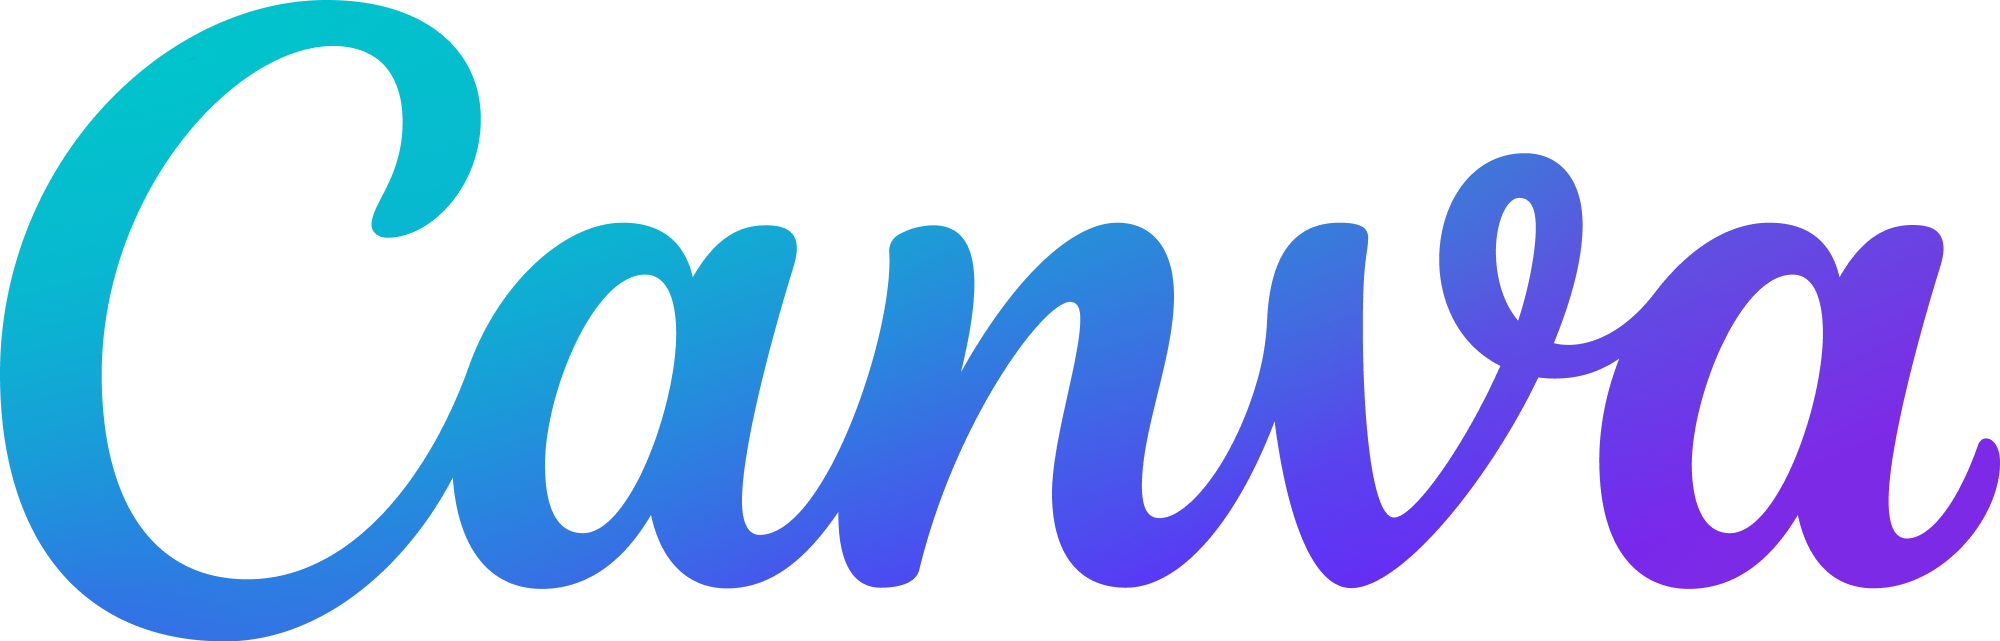 The word "Canva" in cursive text in a blue-to-purple gradient from left to right